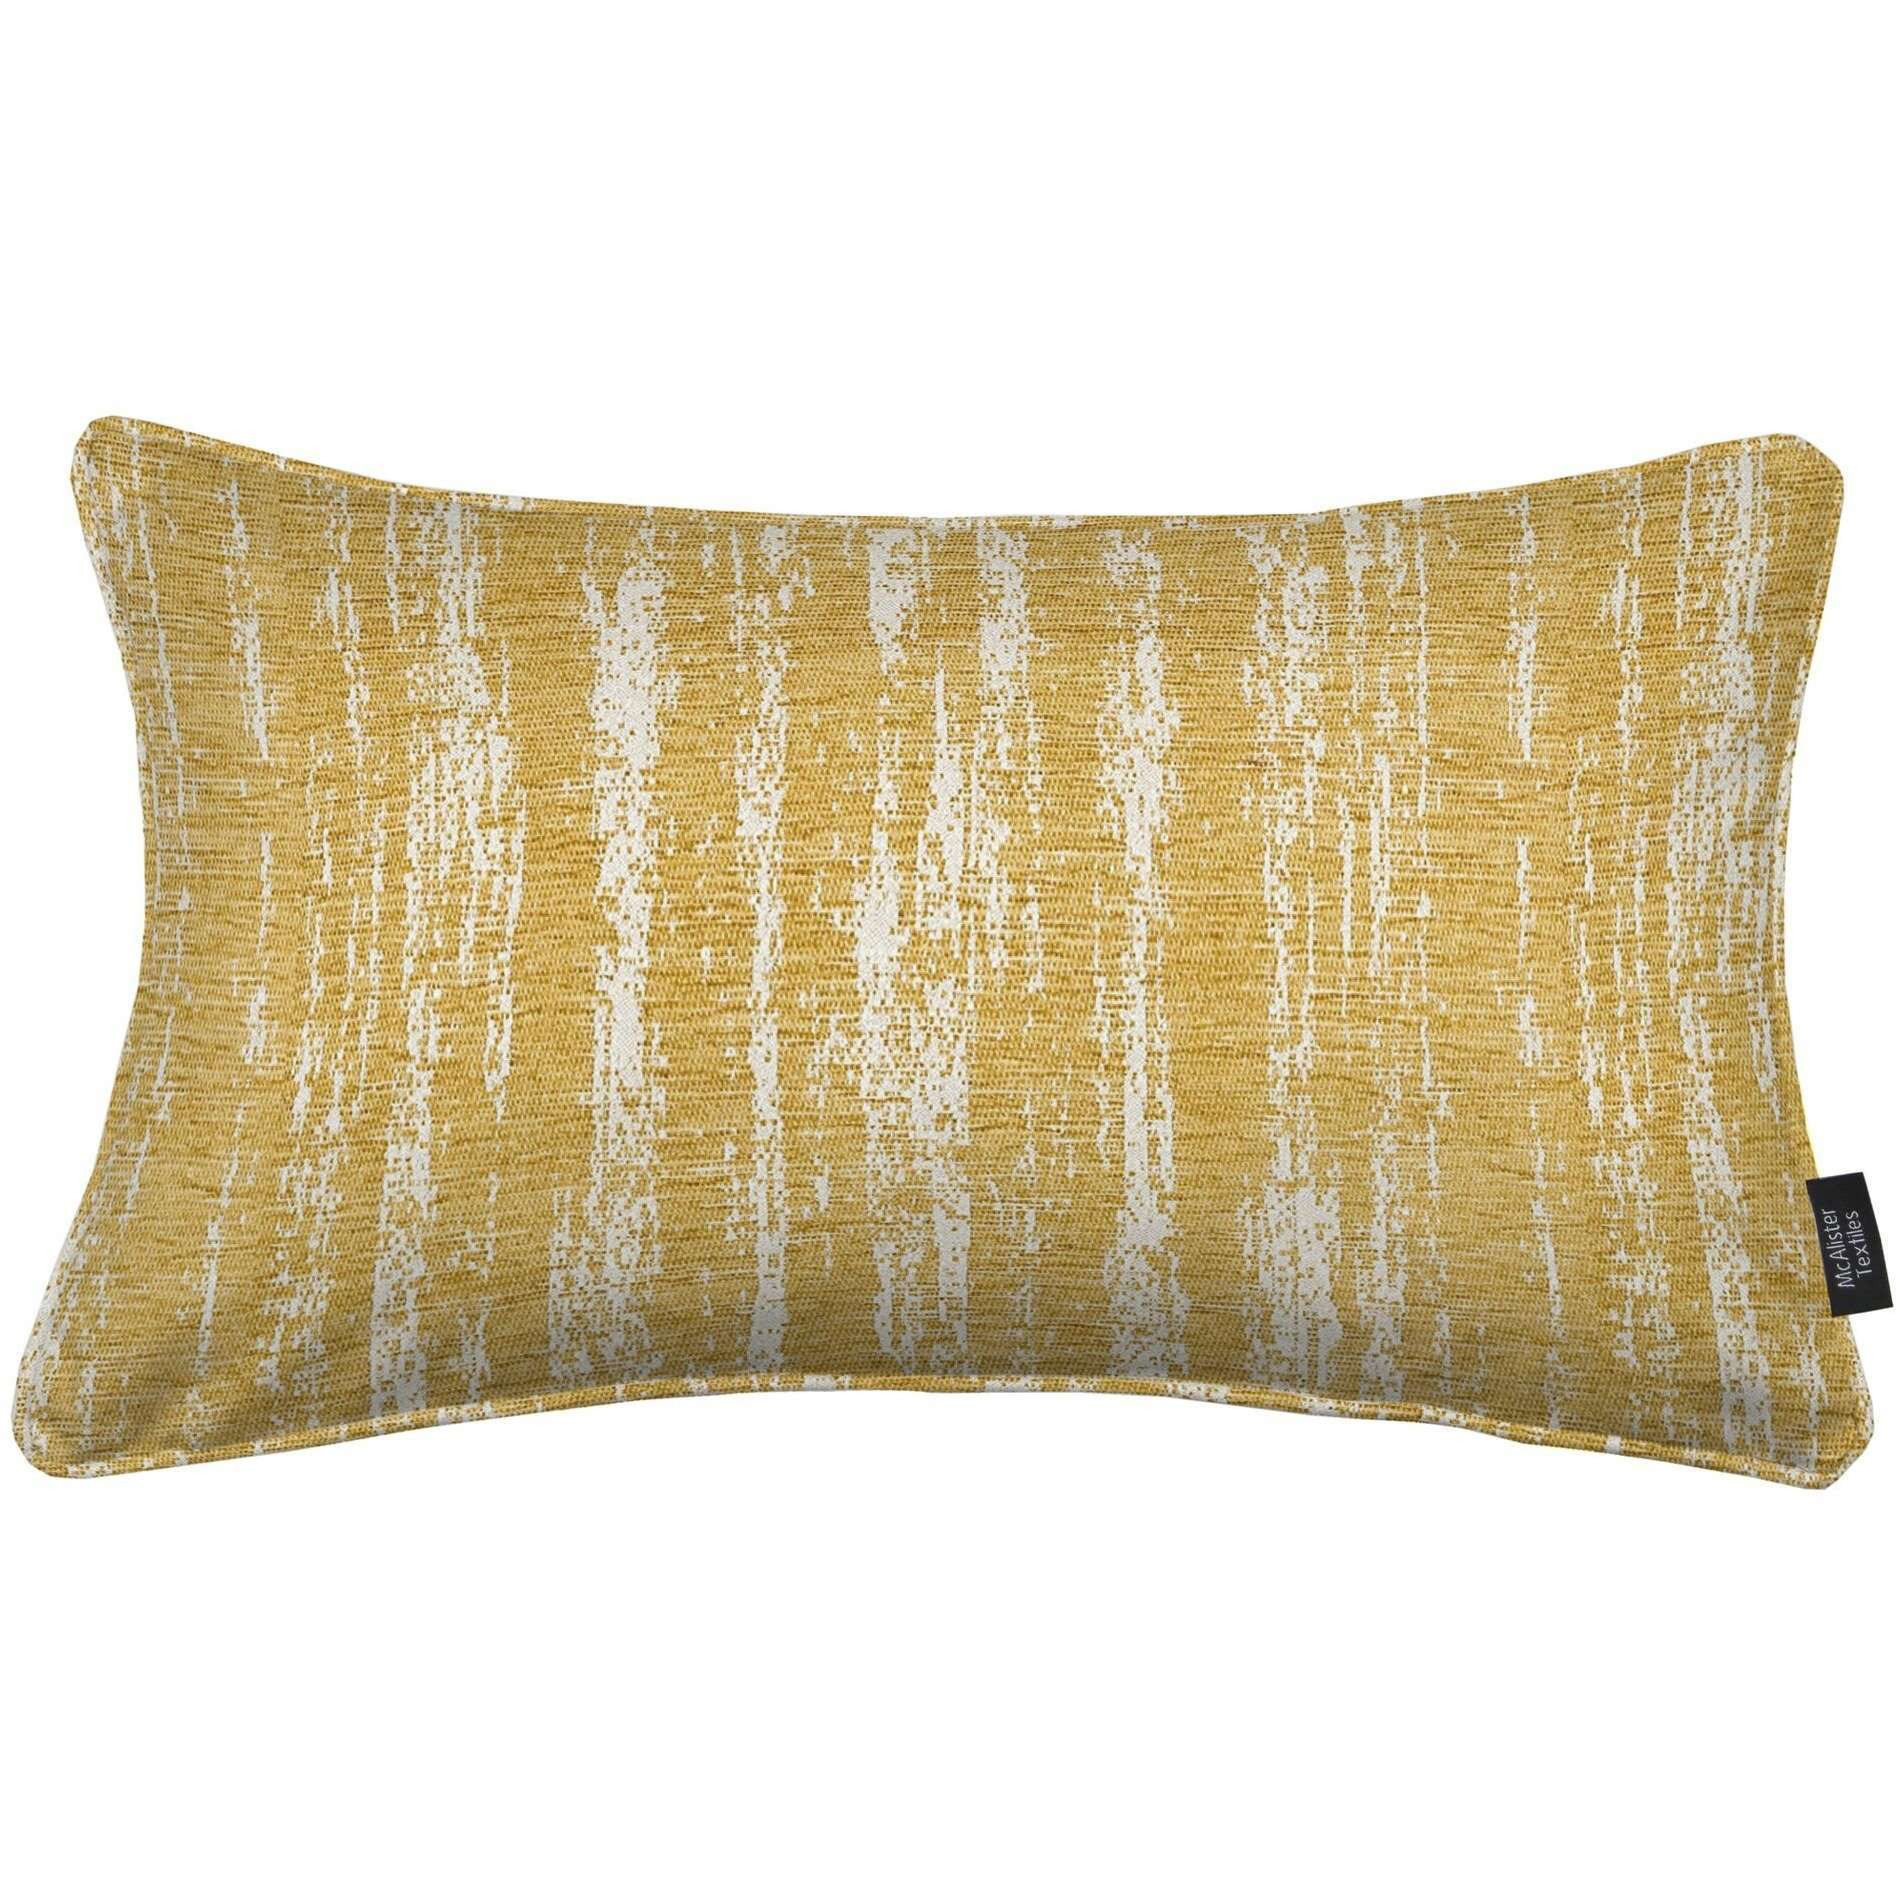 Textured Chenille Mustard Yellow Pillow, Cover Only / 50cm x 30cm